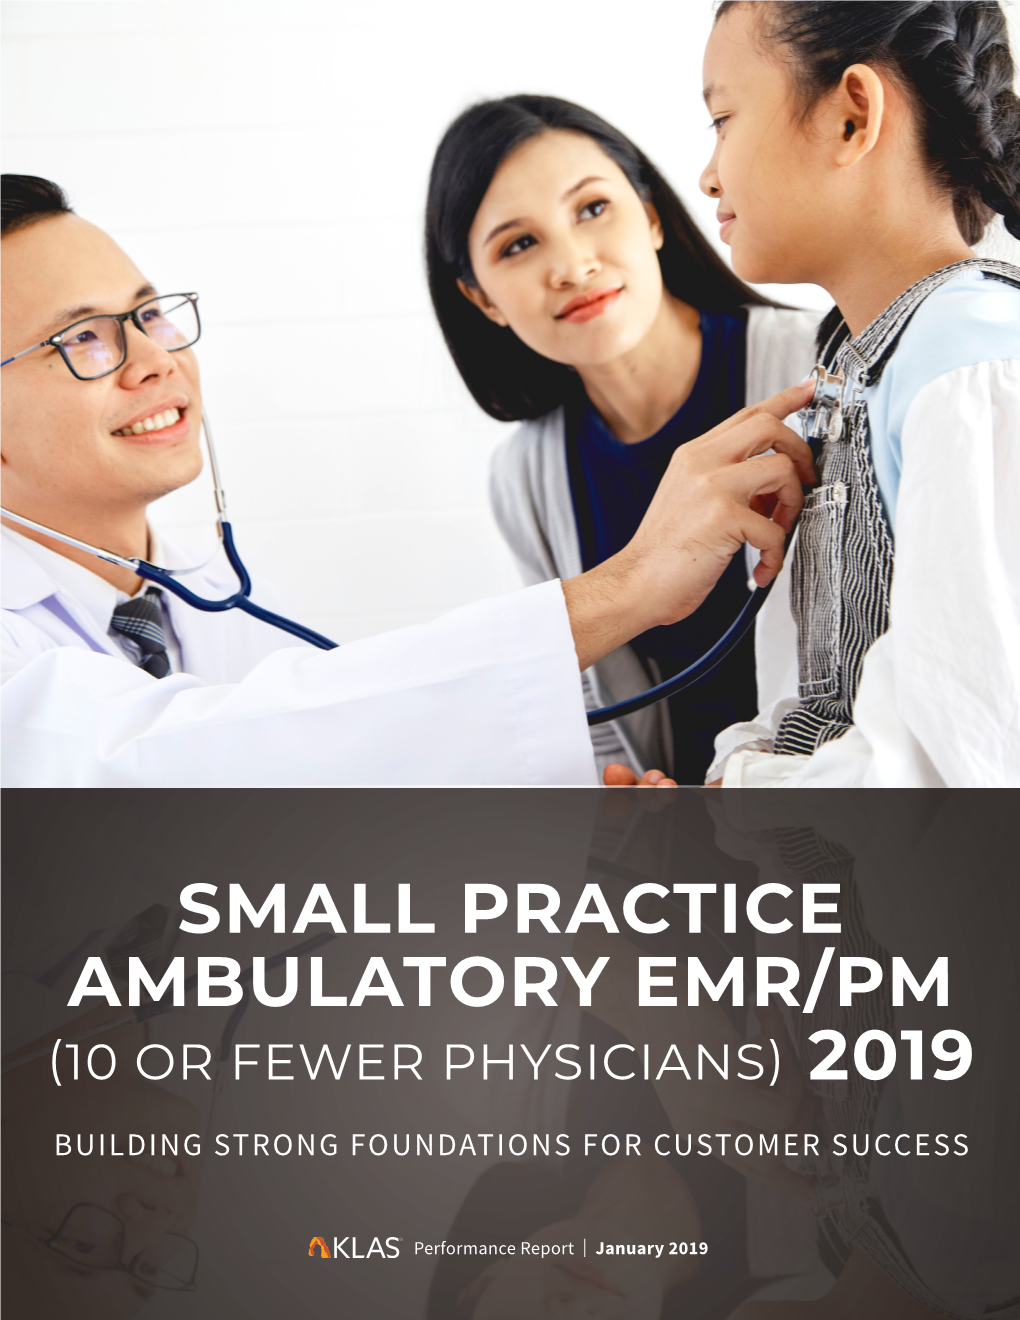 Small Practice Ambulatory Emr/Pm (10 Or Fewer Physicians) 2019